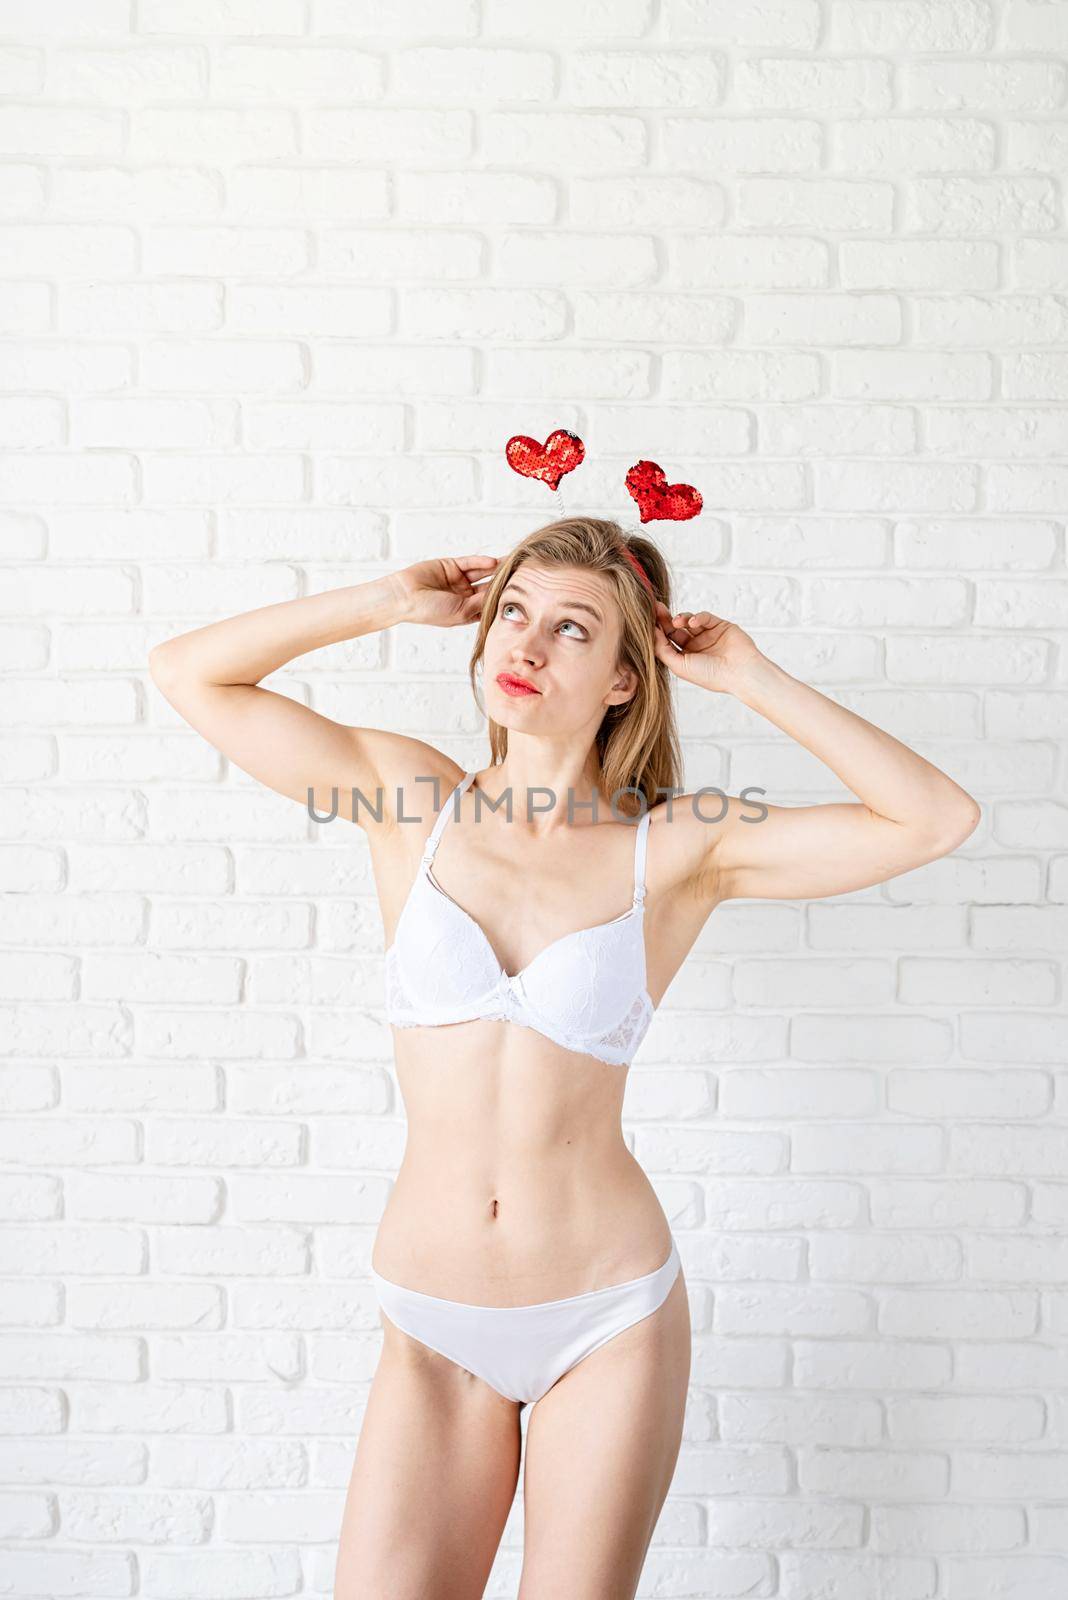 Full length of attractive young brown hair woman in white underwear wearing heart shaped headband posing against white brick wall background